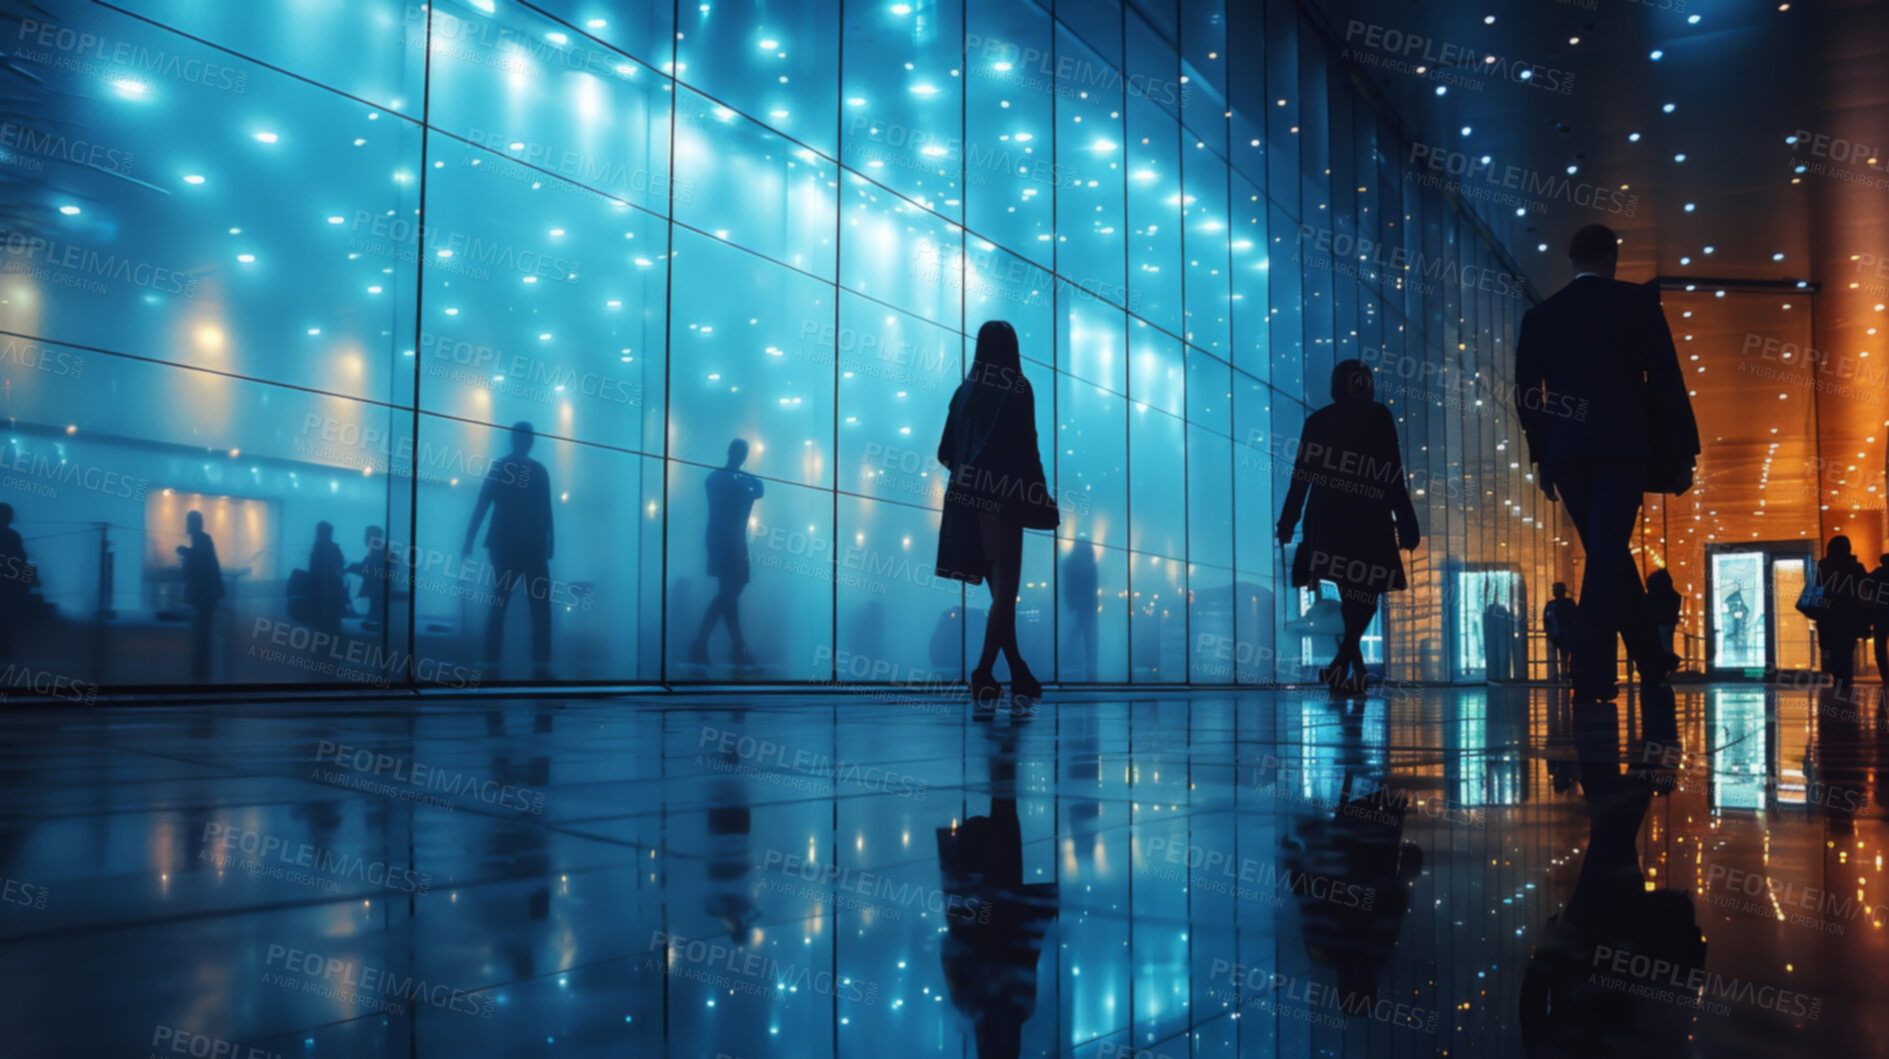 Buy stock photo Abstract, crowds and building background with silhouette effect of workers walking, trading or business. Blurry, lights and modern office building. Wallpaper, corporate and marketing for big data